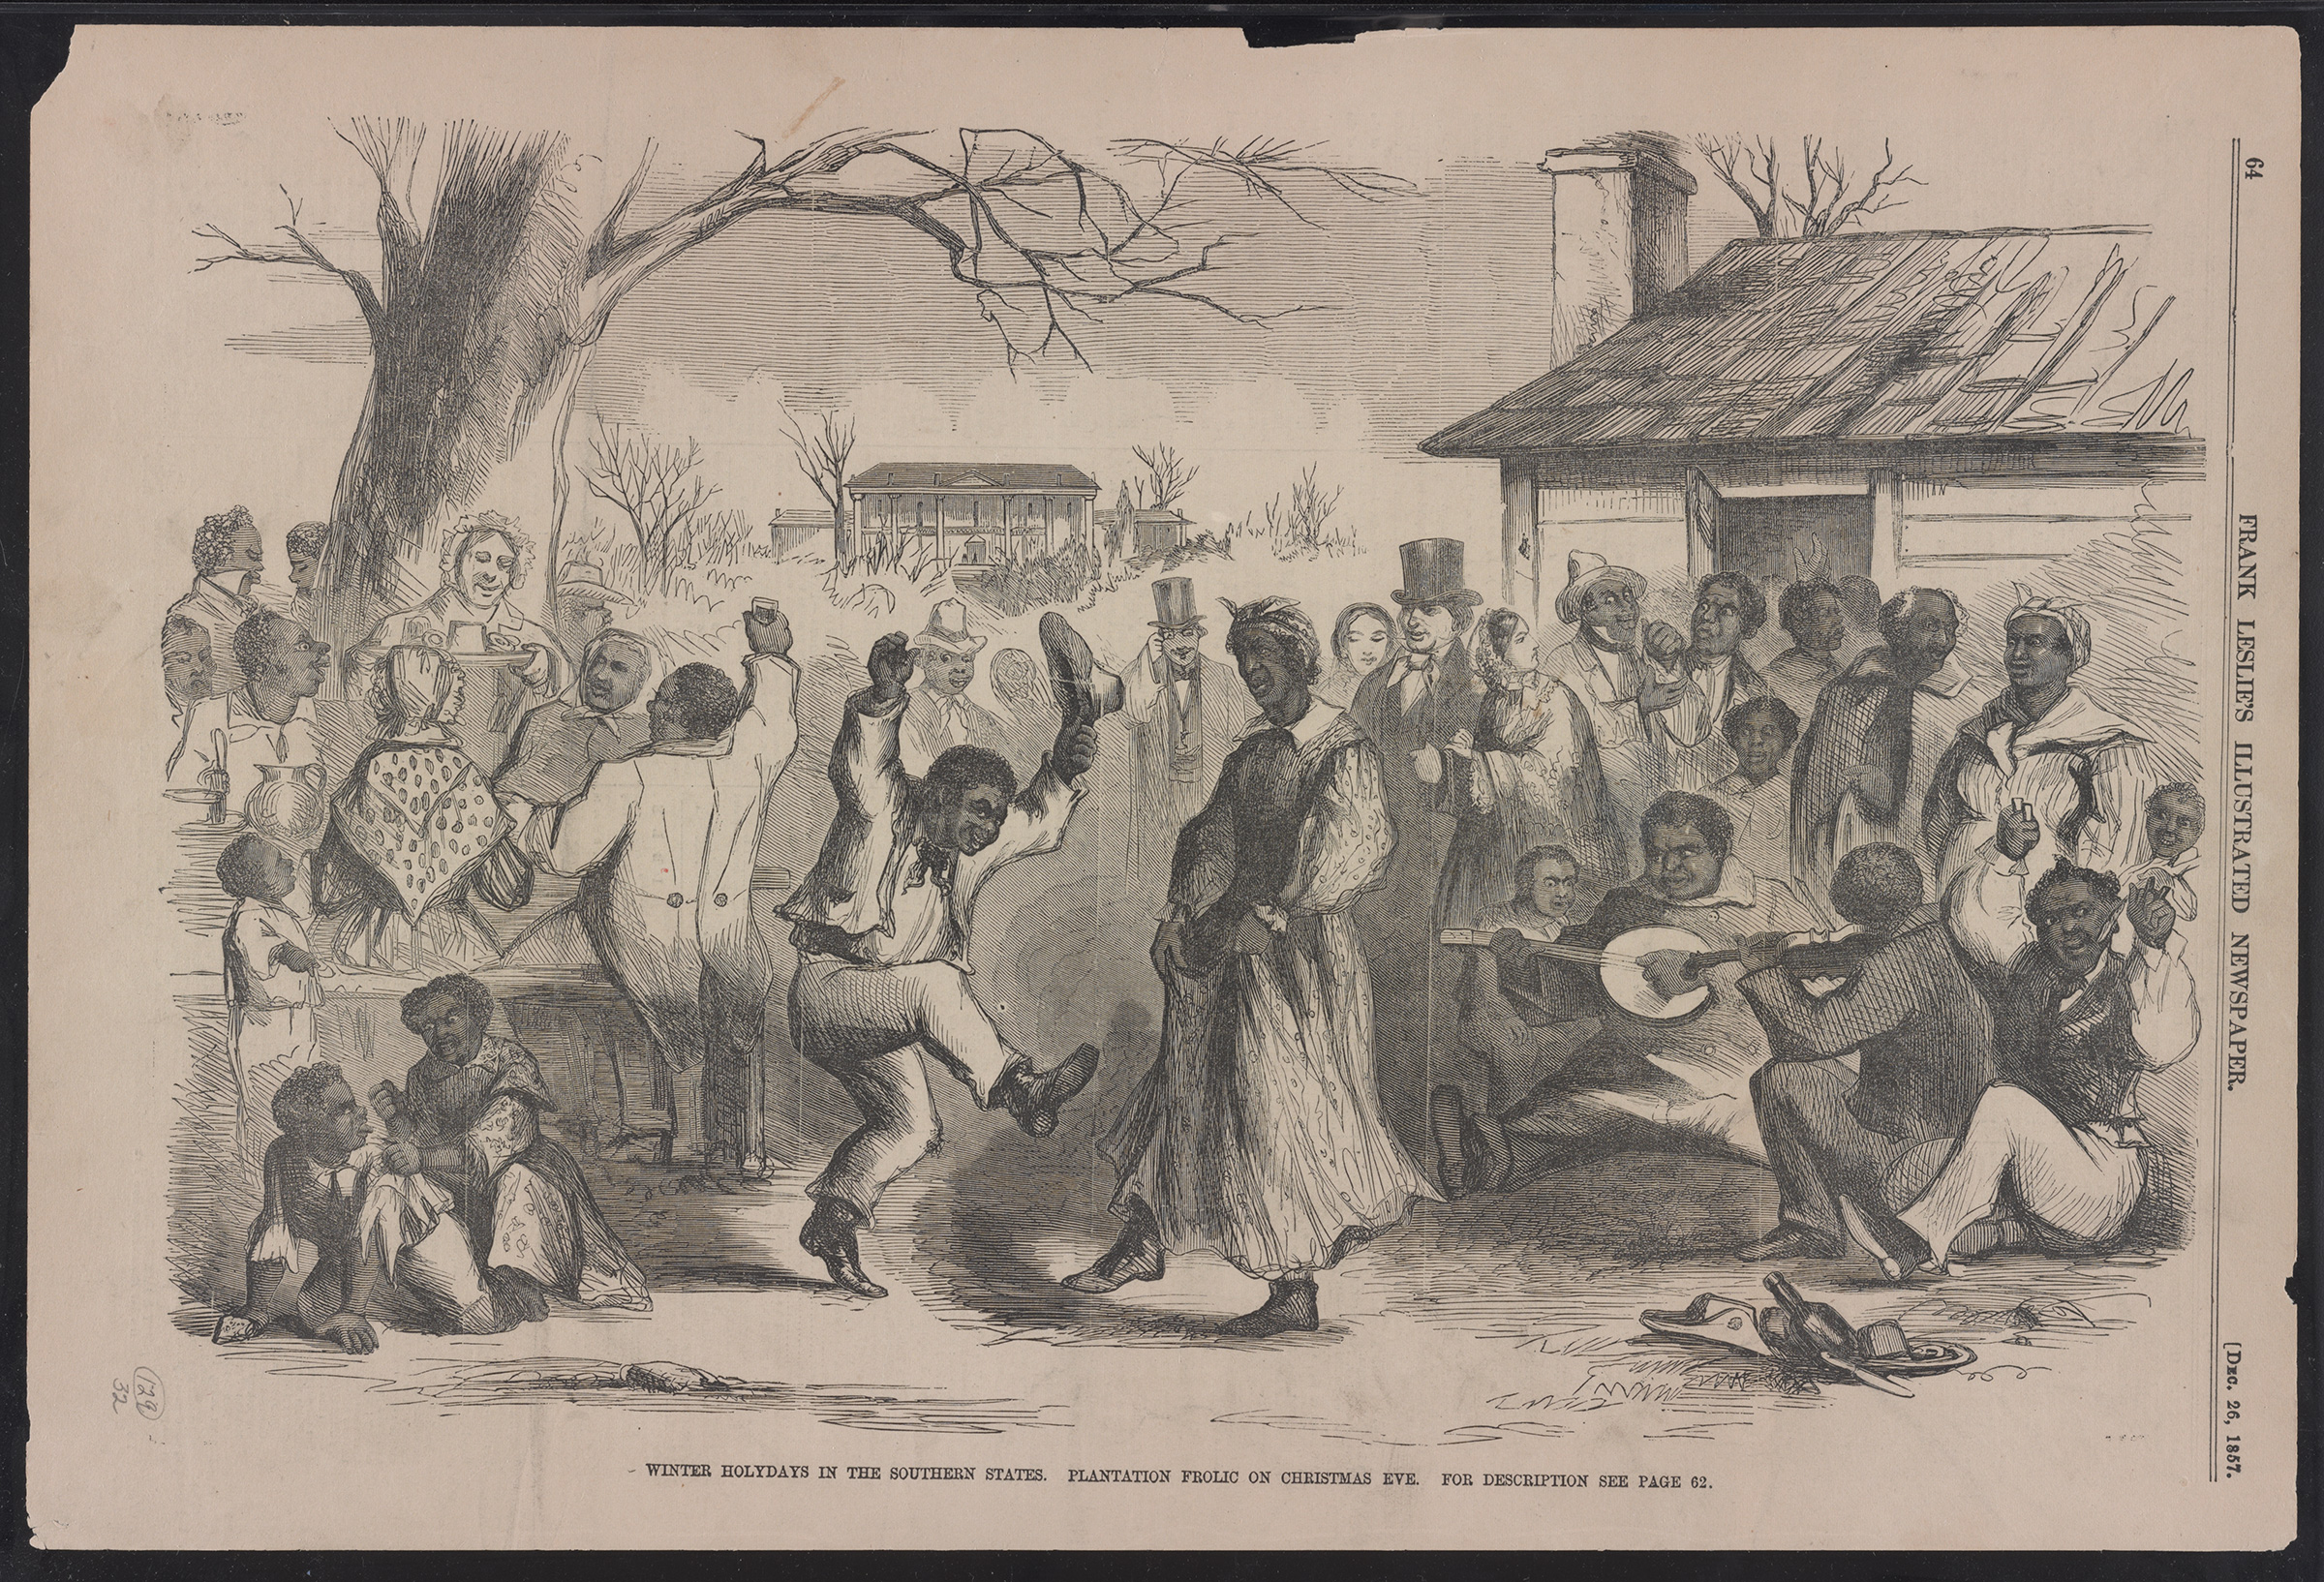 An 1857 illustration of winter holidays in the southern states entitled "Plantation Frolic on Christmas Eve." (Library of Congress)